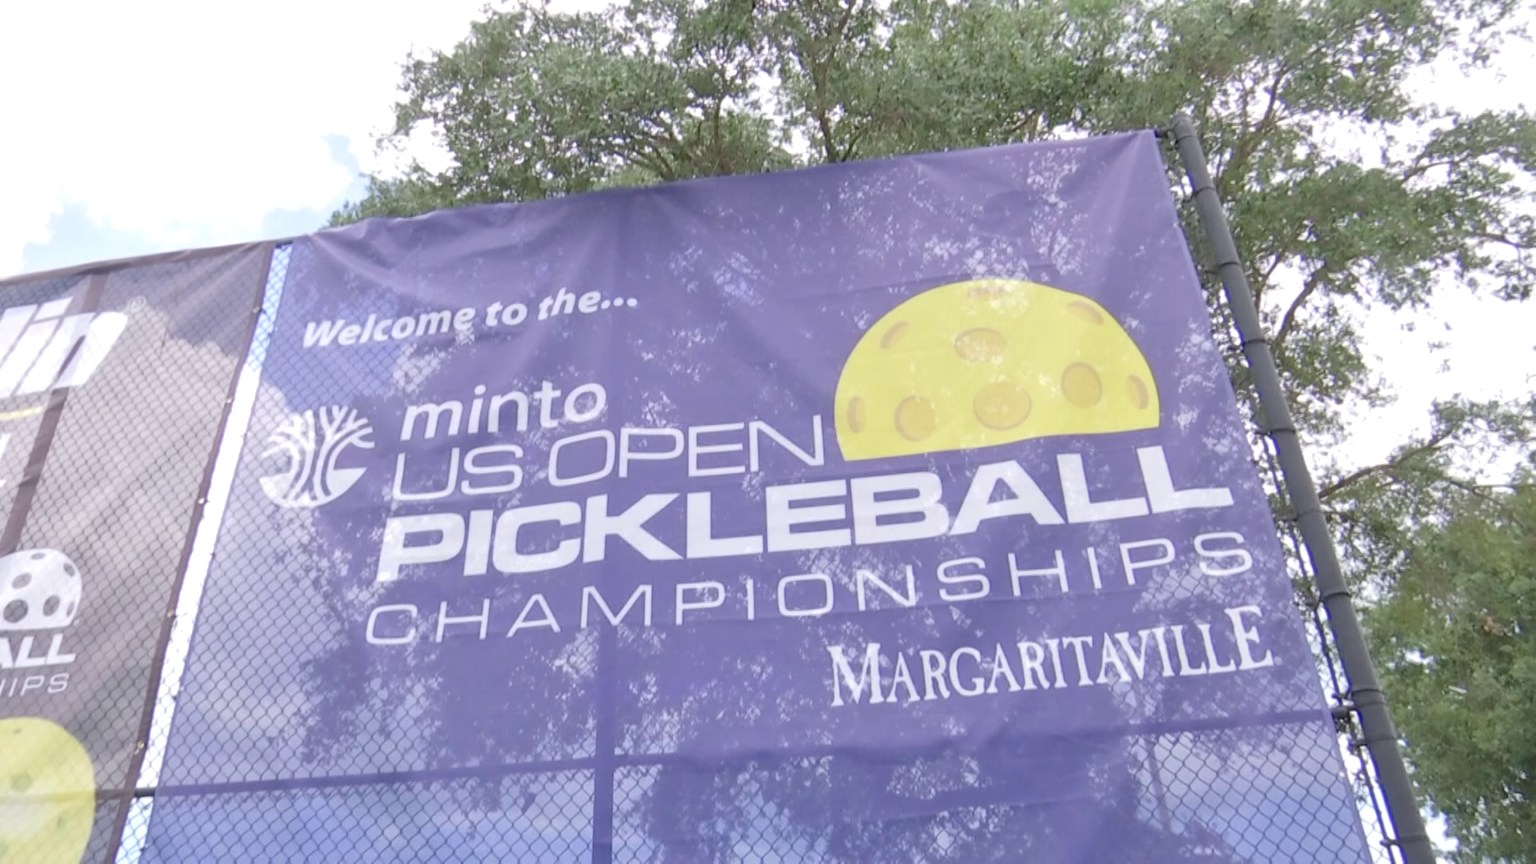 East Naples hosts US Open Pickleball Championship with record 100K prize